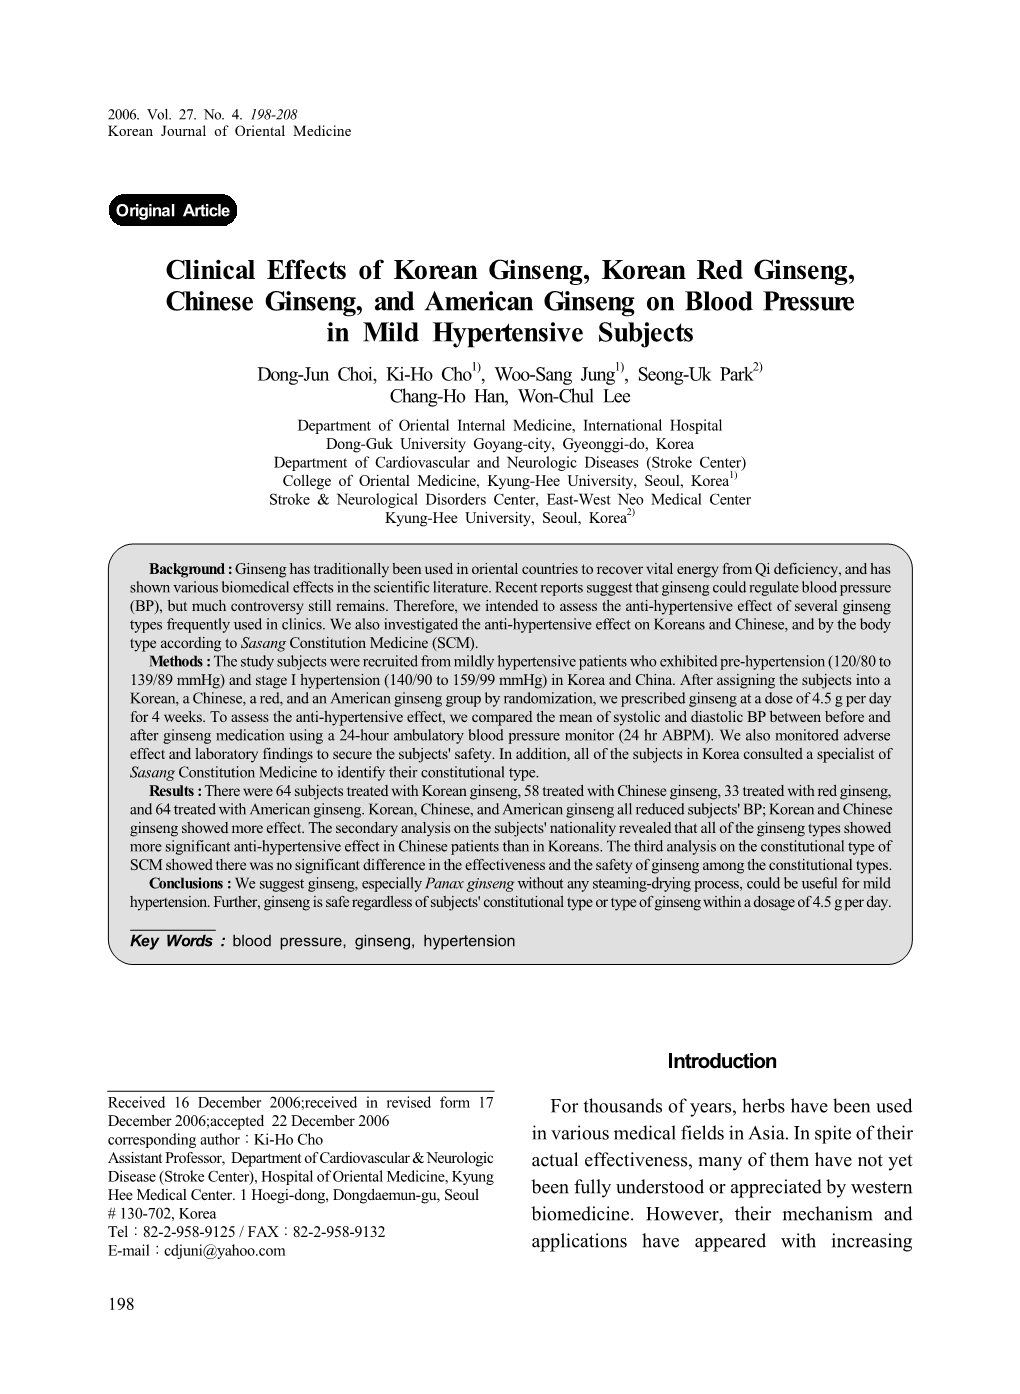 Clinical Effects of Korean Ginseng, Korean Red Ginseng, Chinese